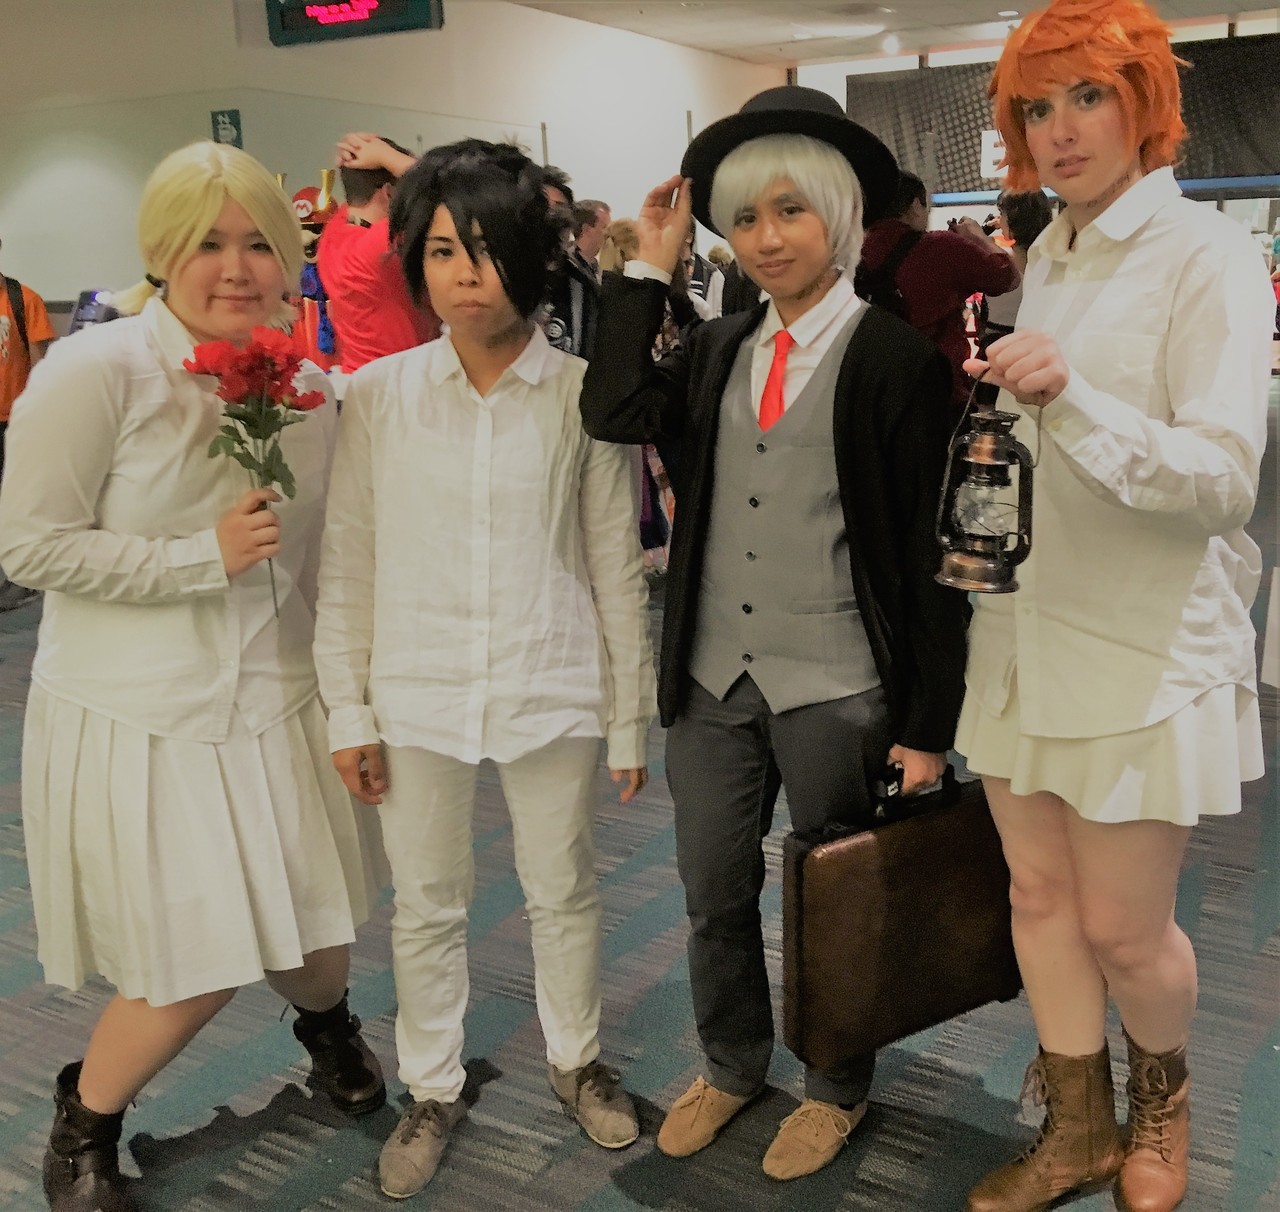 The Promised Neverland Conny Cosplay - The Best Promised Neverland